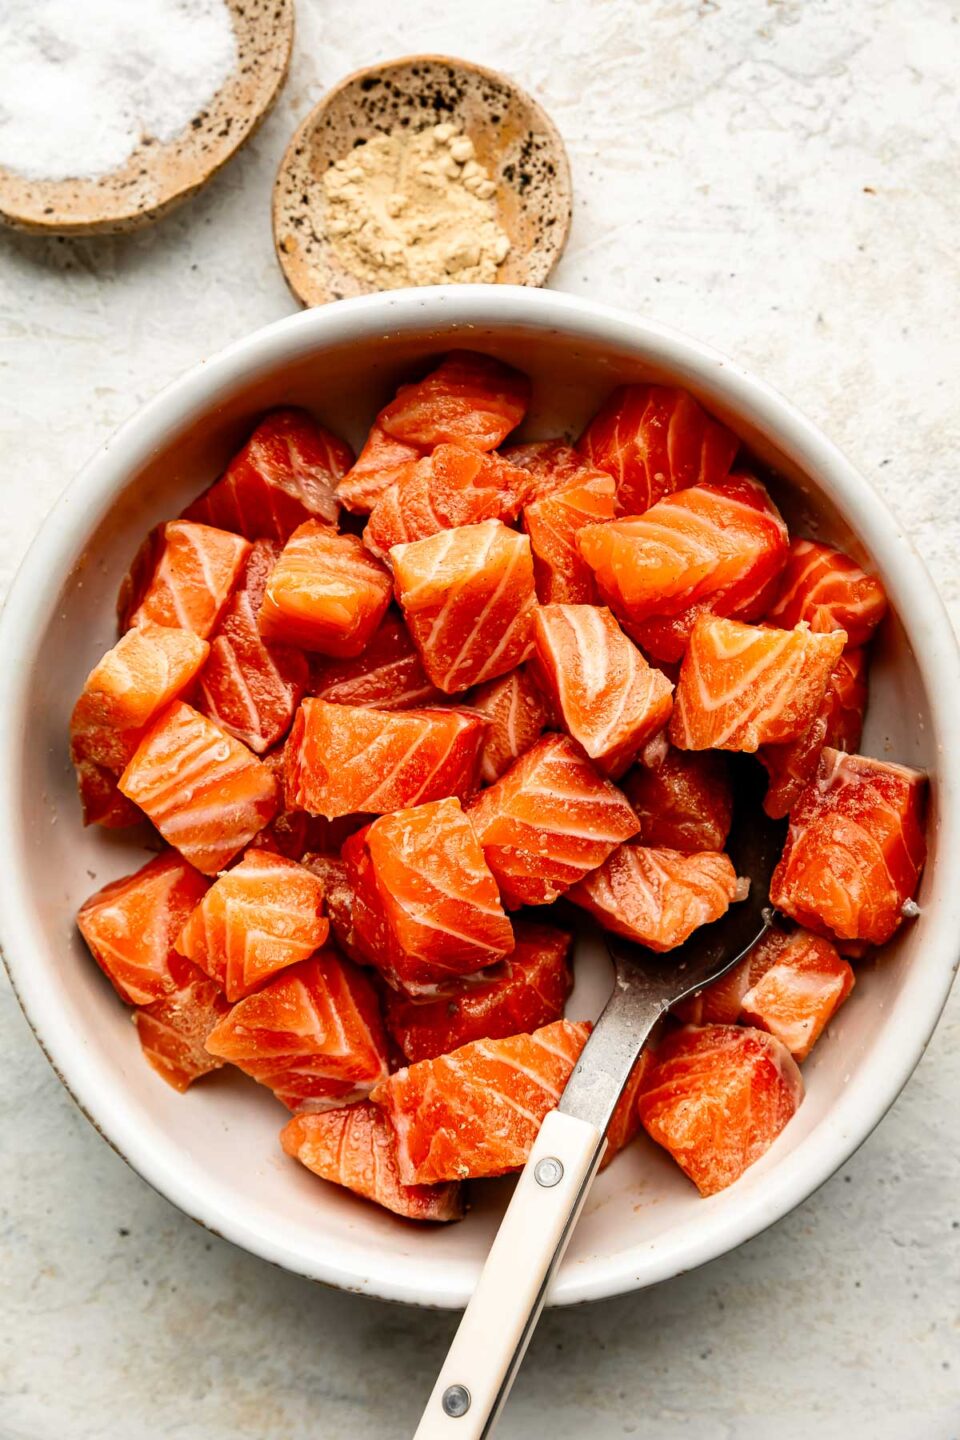 An overhead shot of raw cubed salmon in a white bowl atop an off-white textured surface. Dishes of salt and pepper sit alongside the bowl.